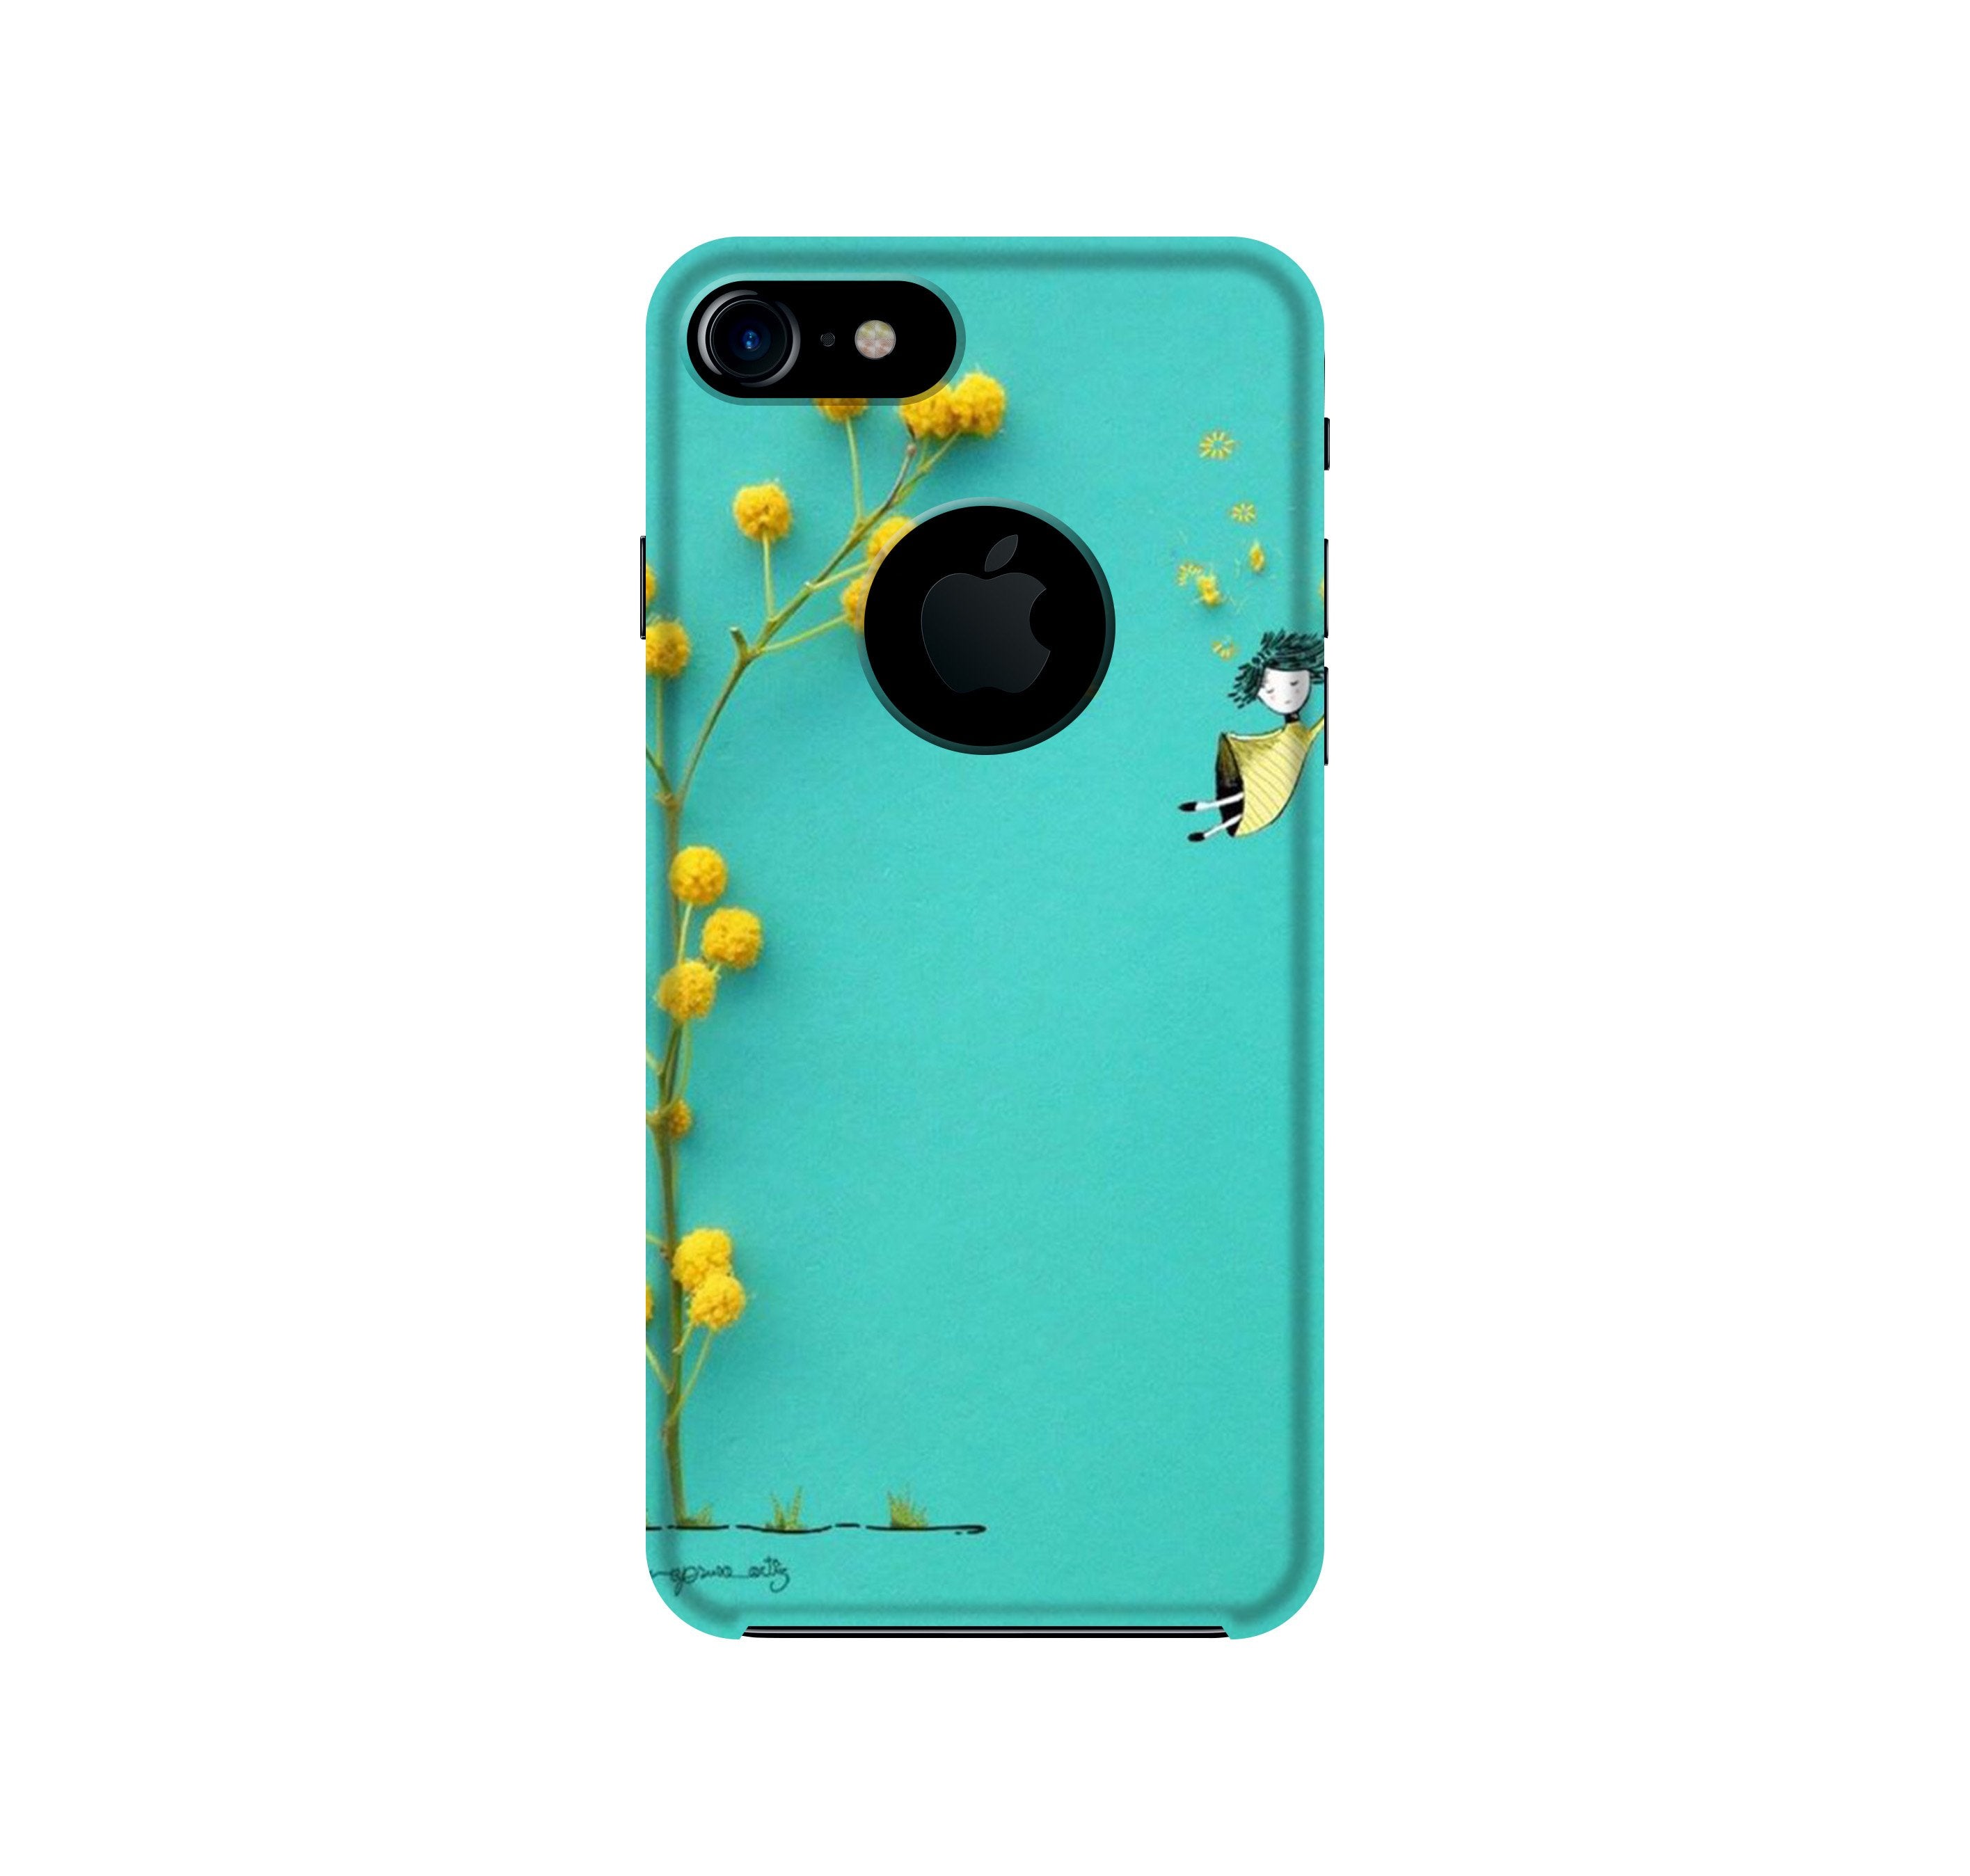 Flowers Girl Case for iPhone 7 logo cut (Design No. 216)